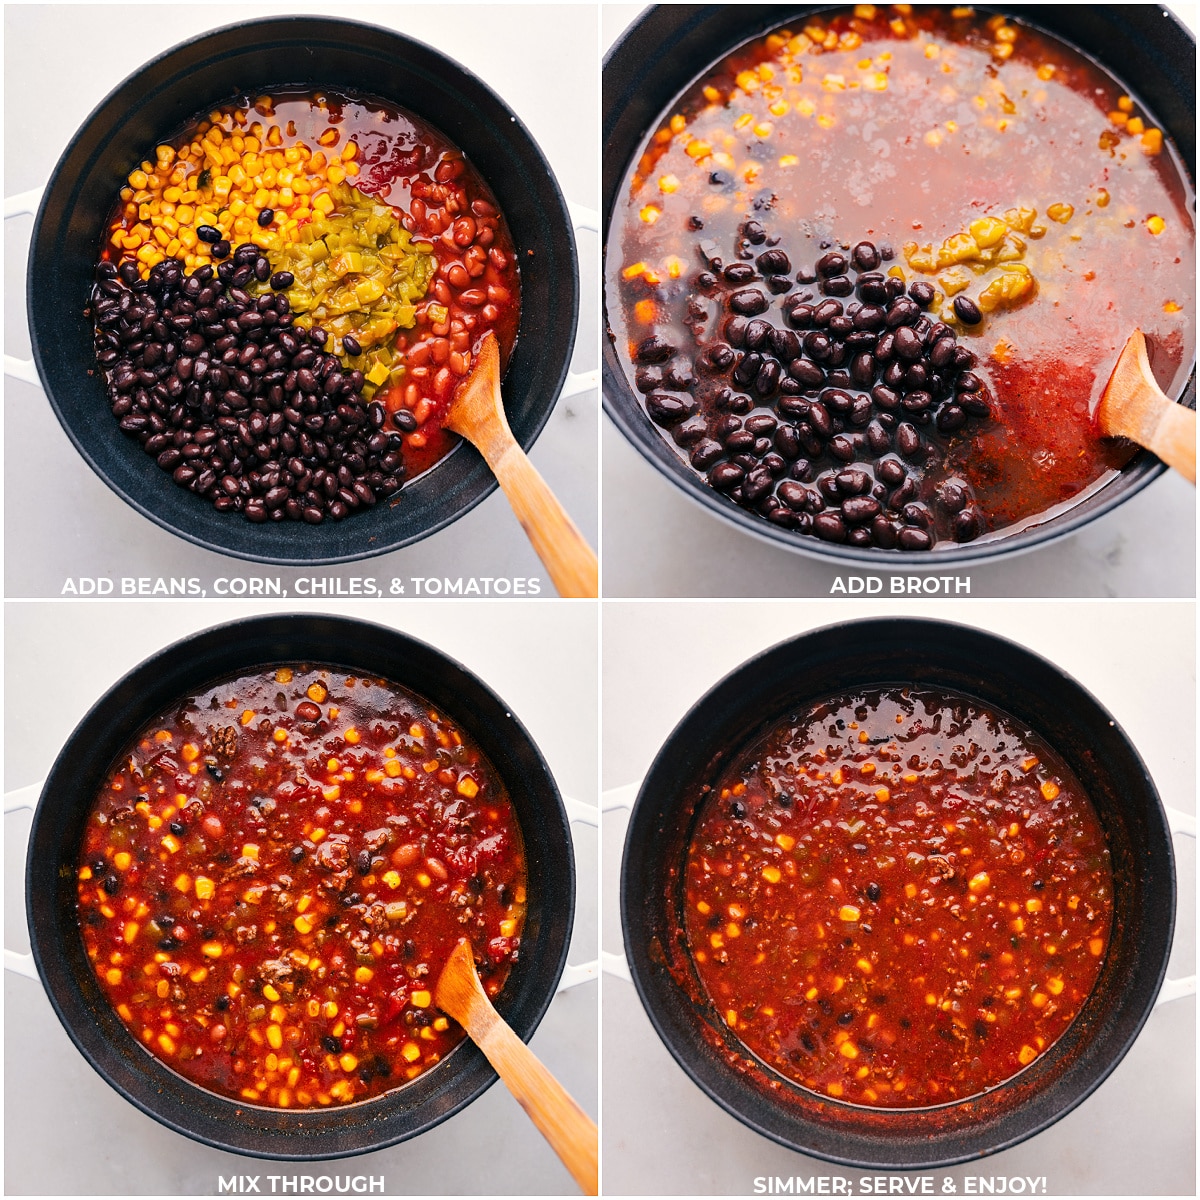 Preparing a delicious pot of Taco Soup by adding beans, corn, chiles, and broth, and mixing it all together for that perfect taco soup flavor.